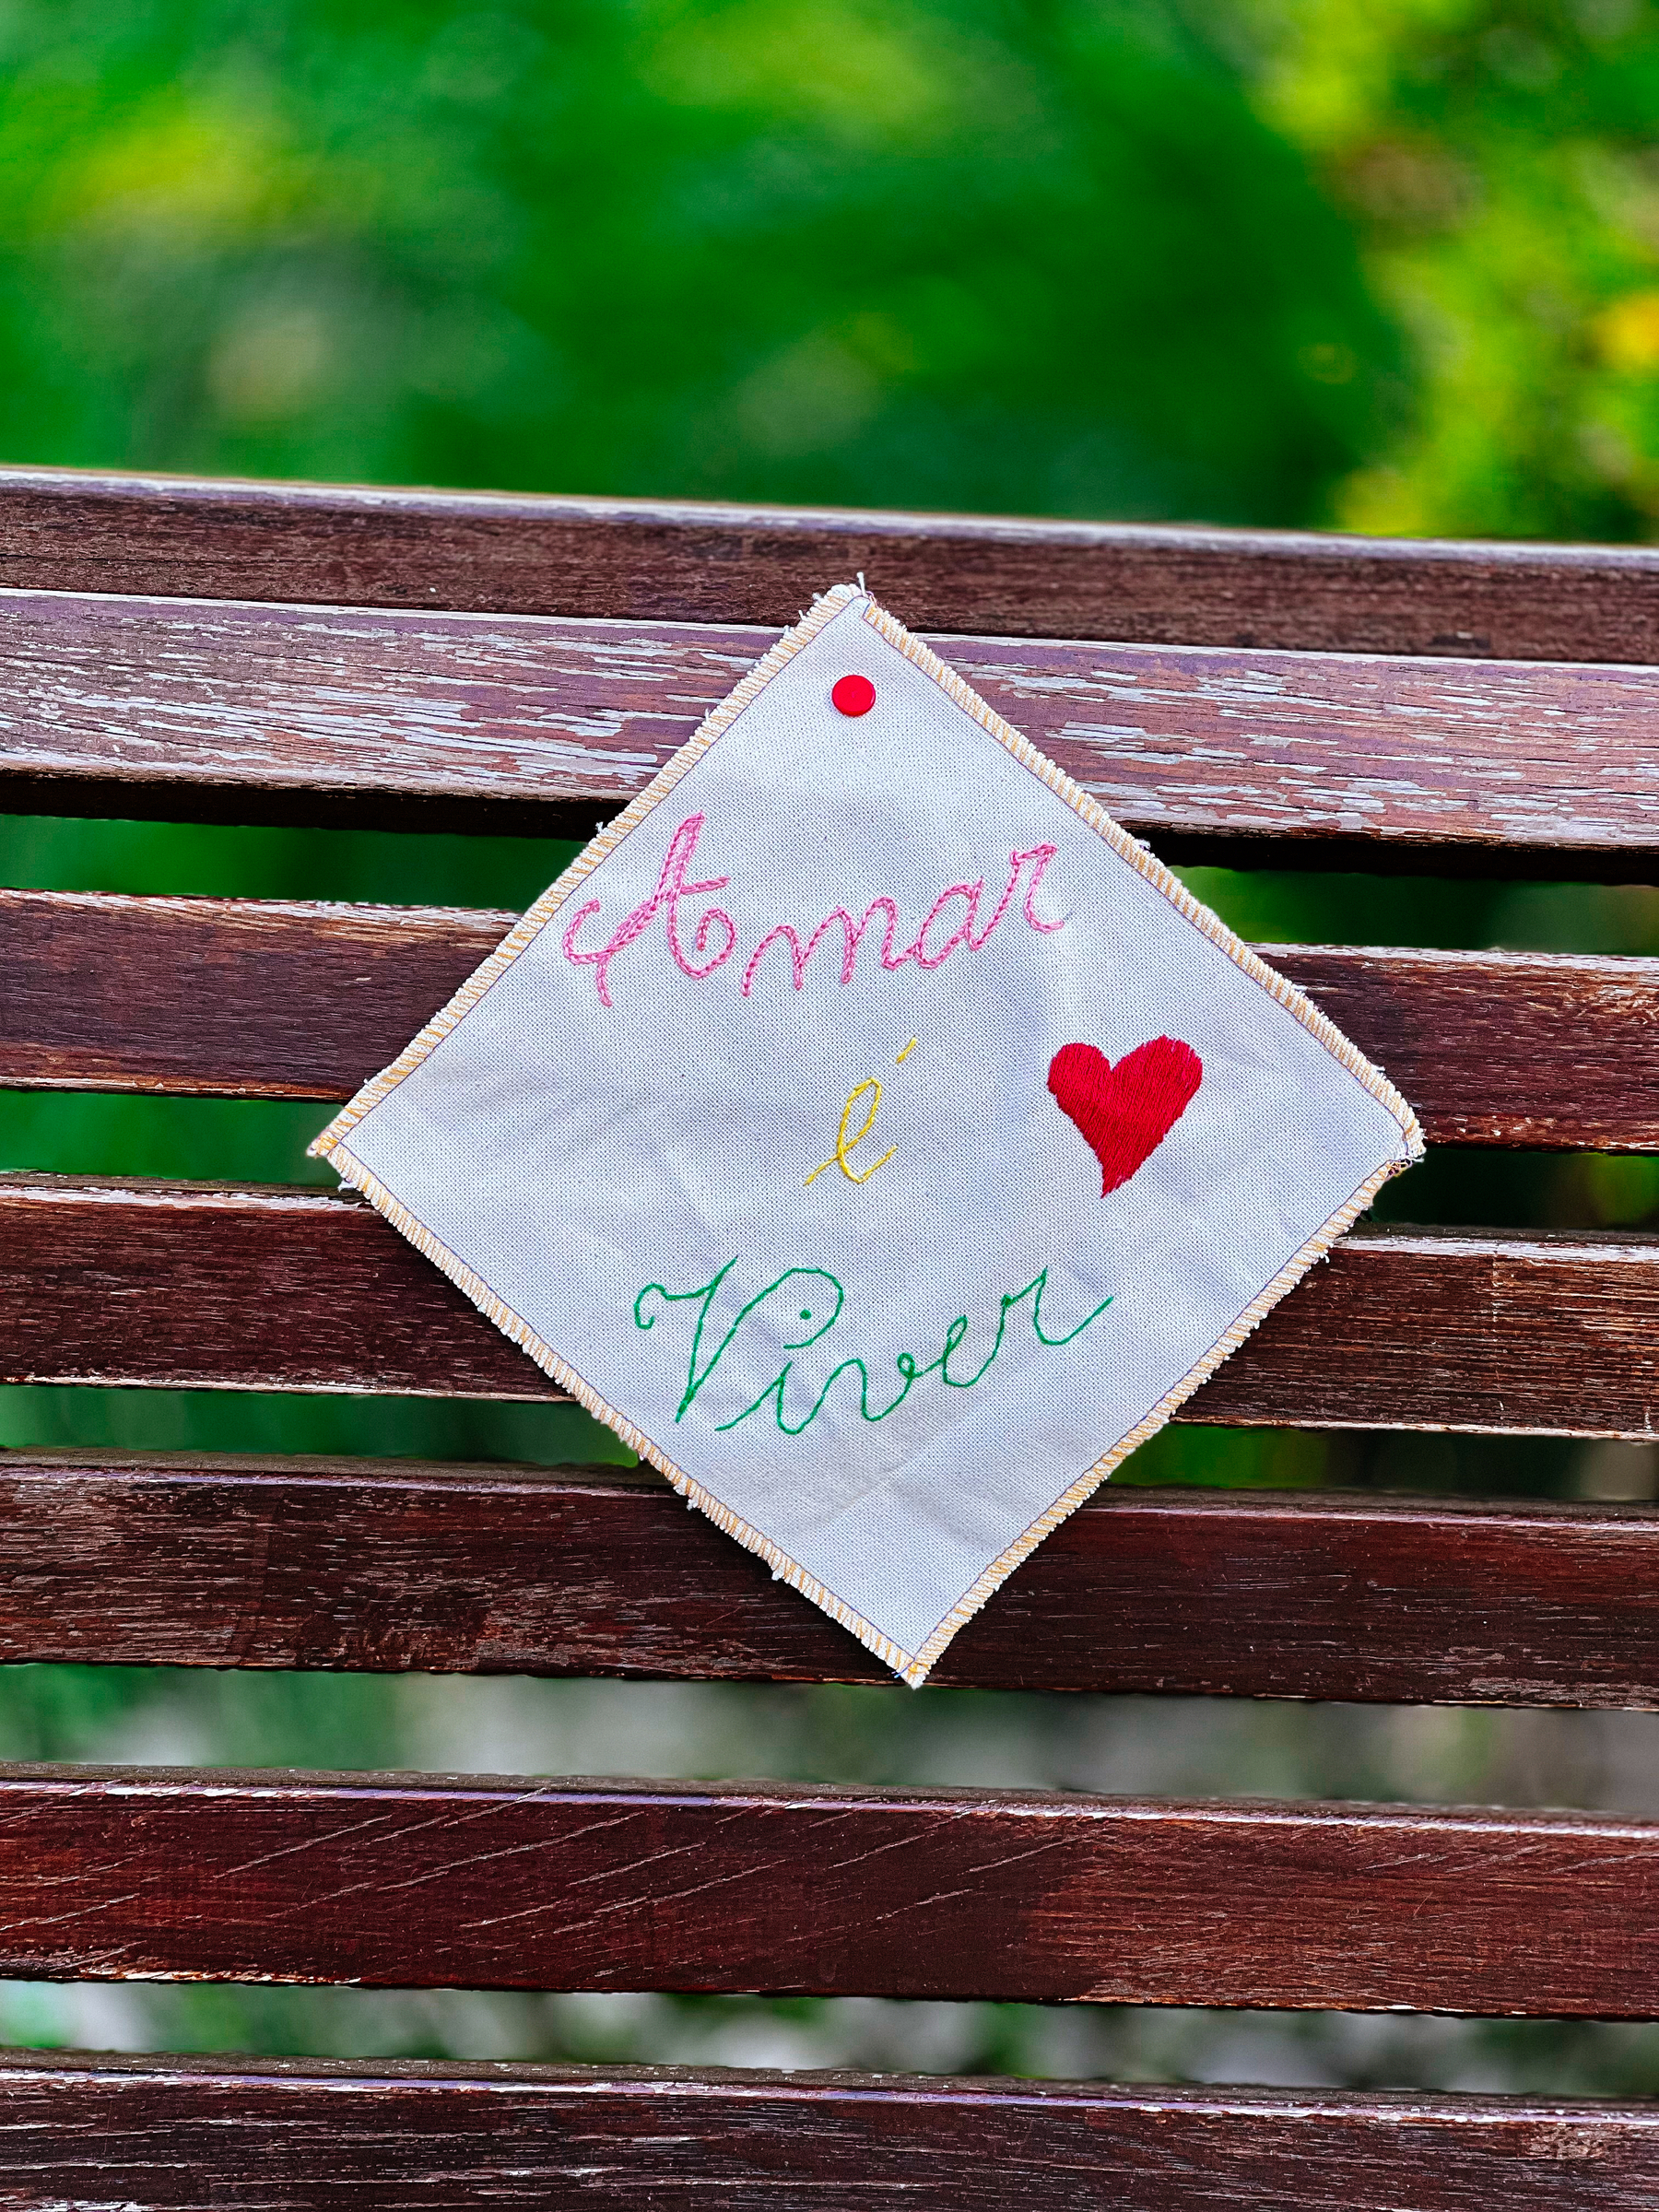 &ldquo;To Love is To Live&rdquo;, embroidered, stuck to a park bench.